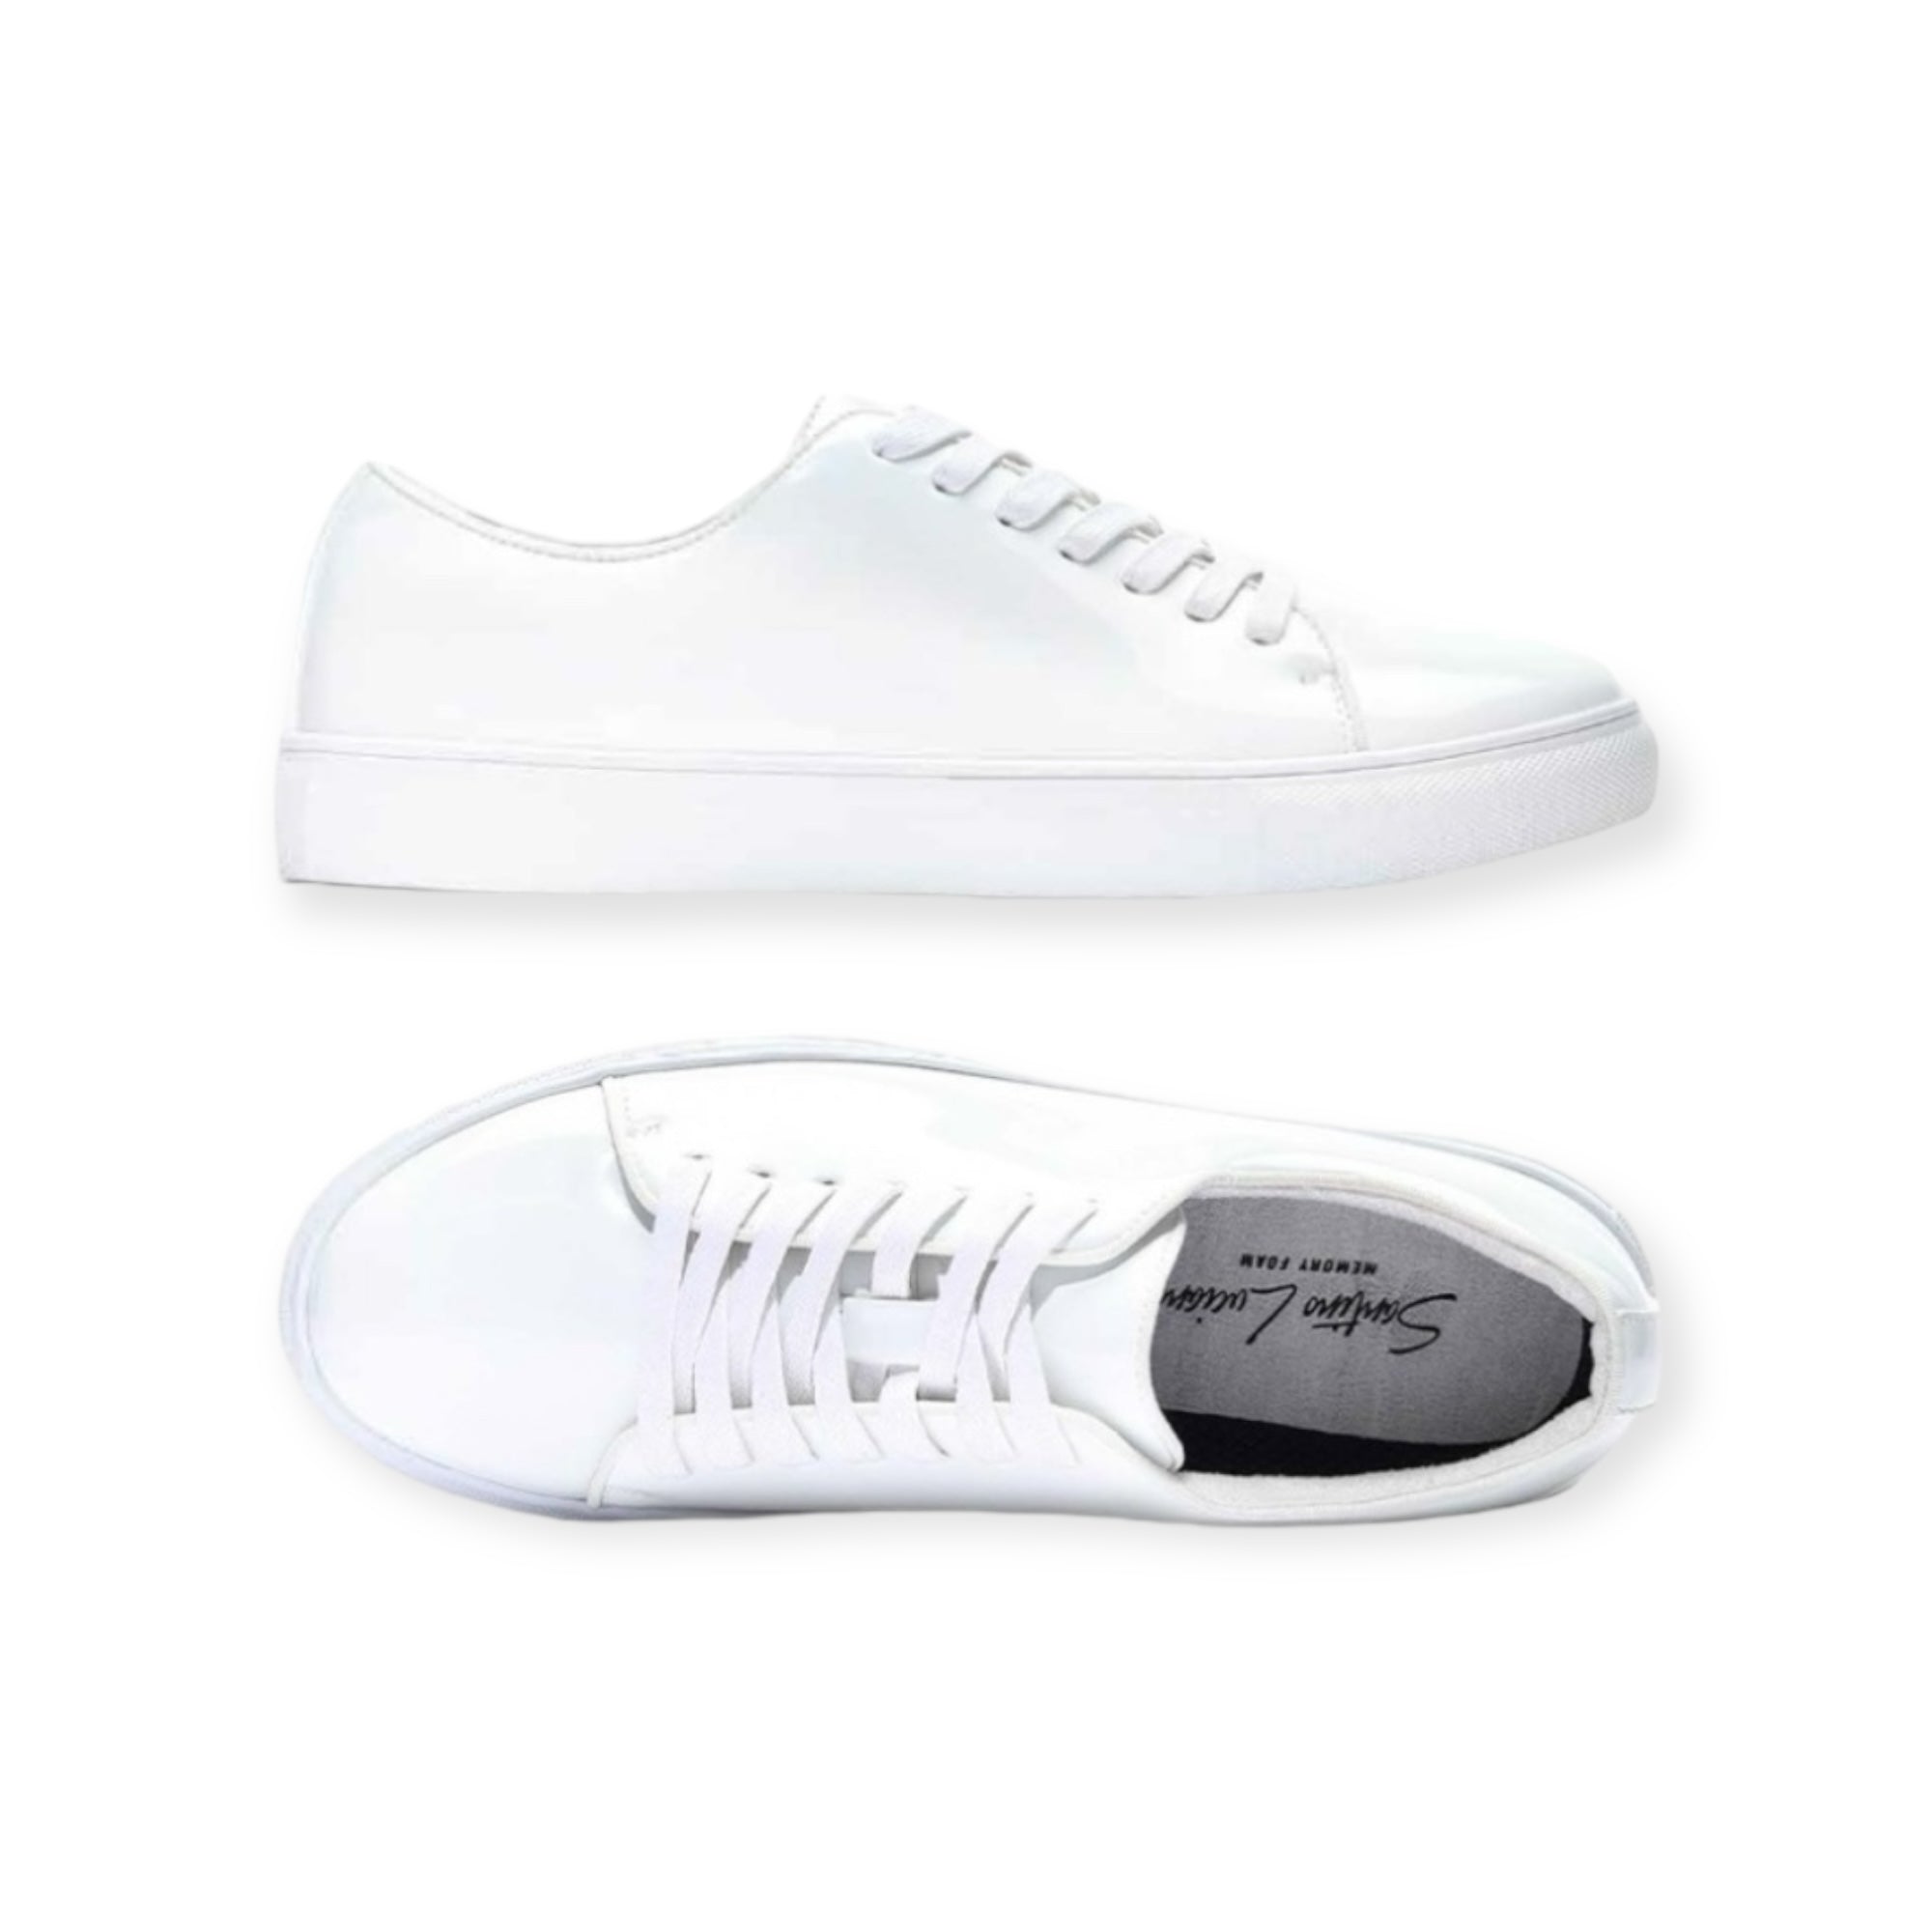 Mens Patent Leather Sneaker